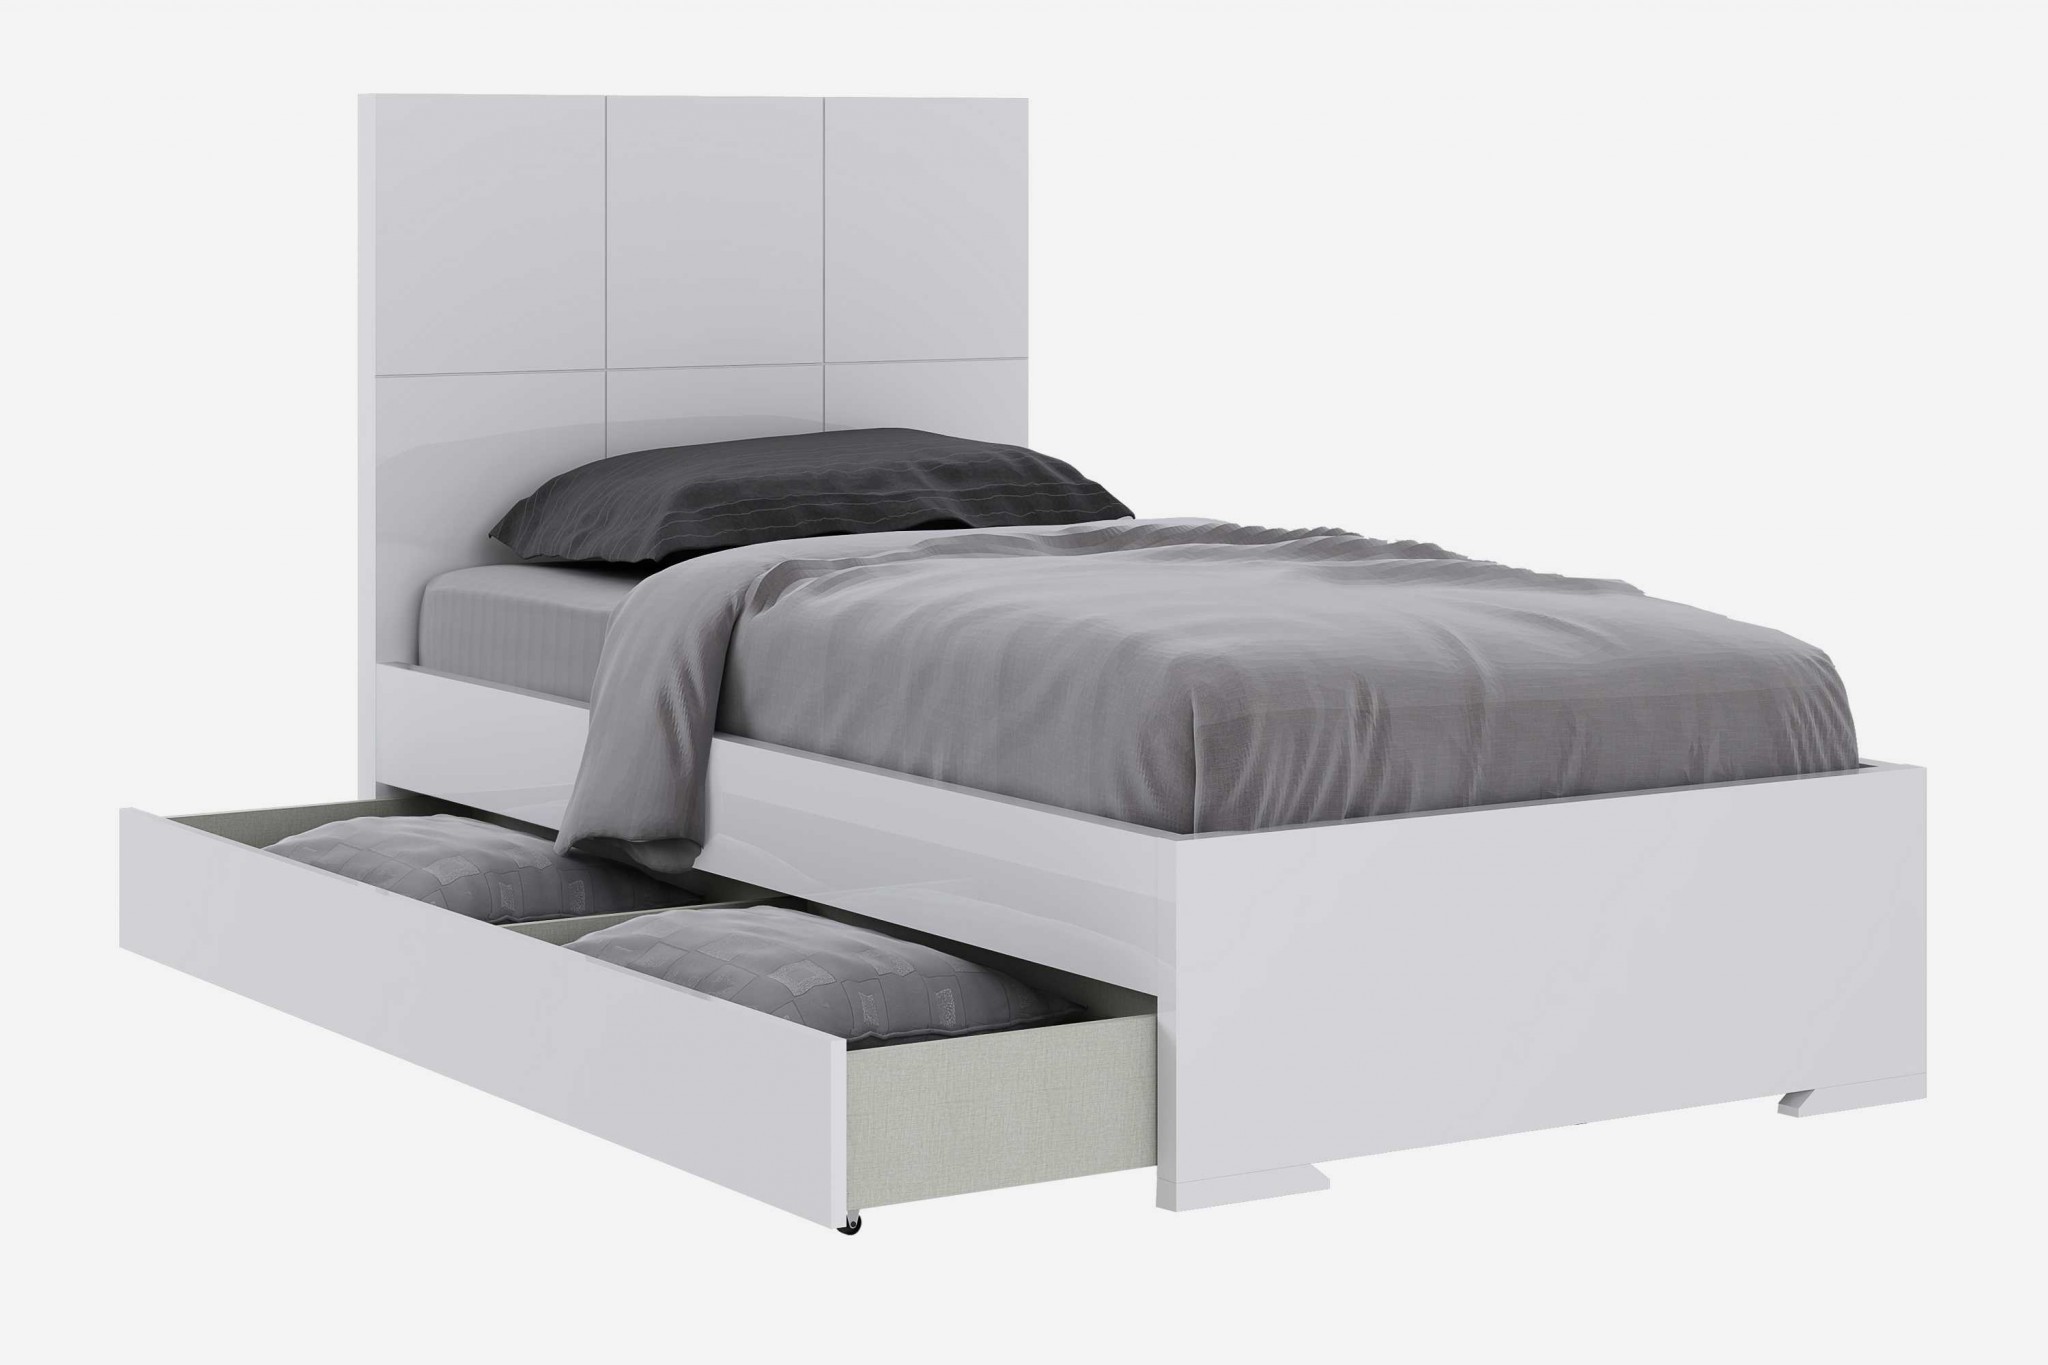 42" X 79" X 48" Gloss White Stainless Steel Twin Bed